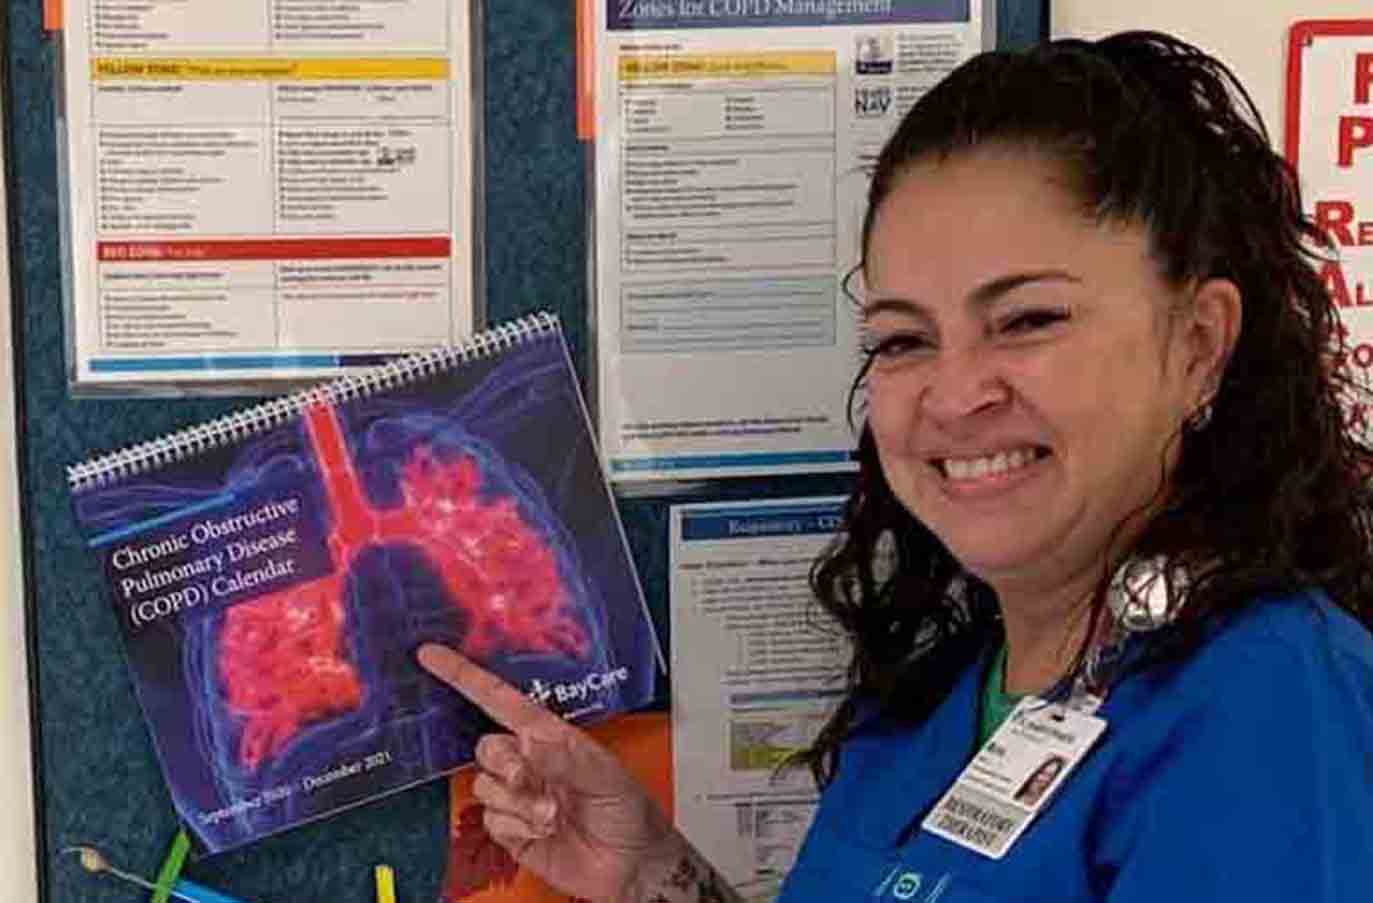 As a pulmonary patient navigator, Maria Daniels focuses on reducing readmissions rates for COPD patients.